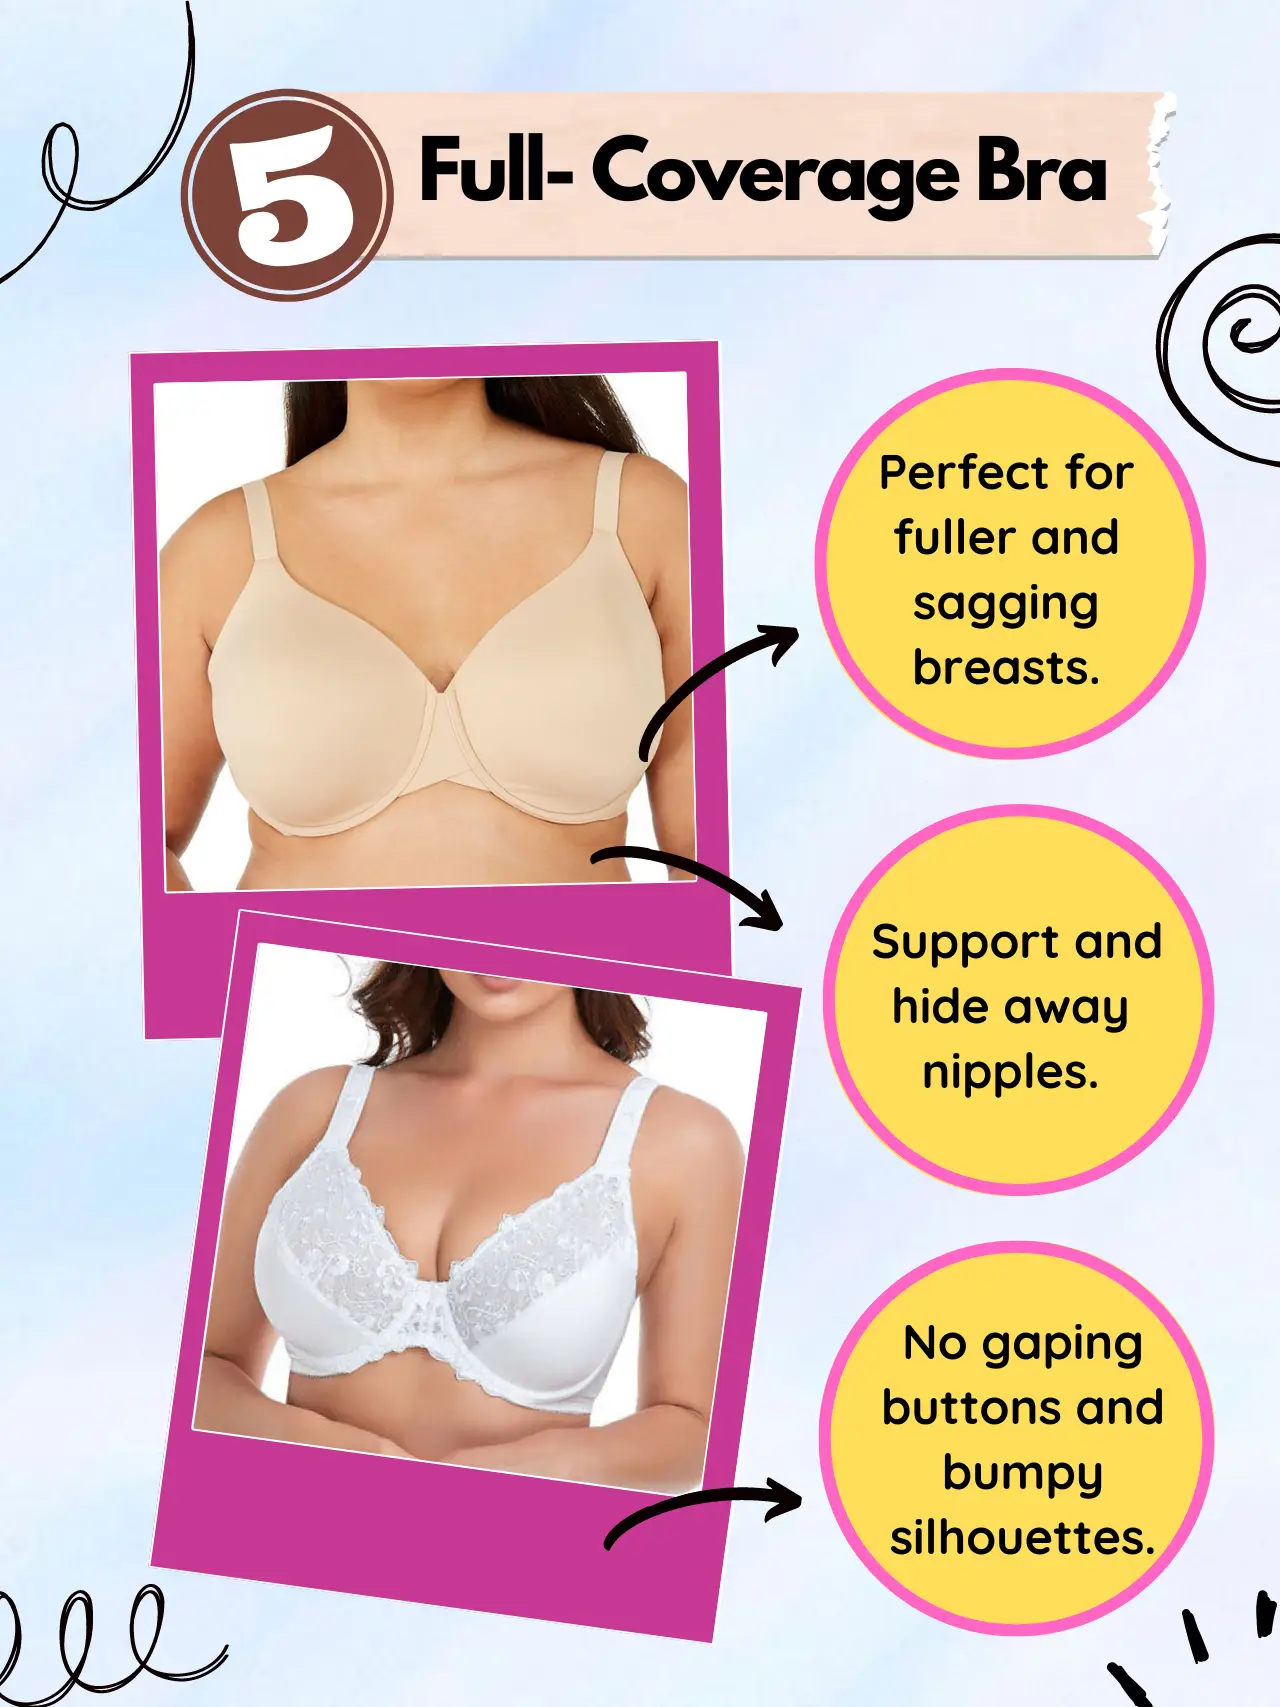 Neubodi - Getting the RIGHT BRA SIZE is important but knowing your